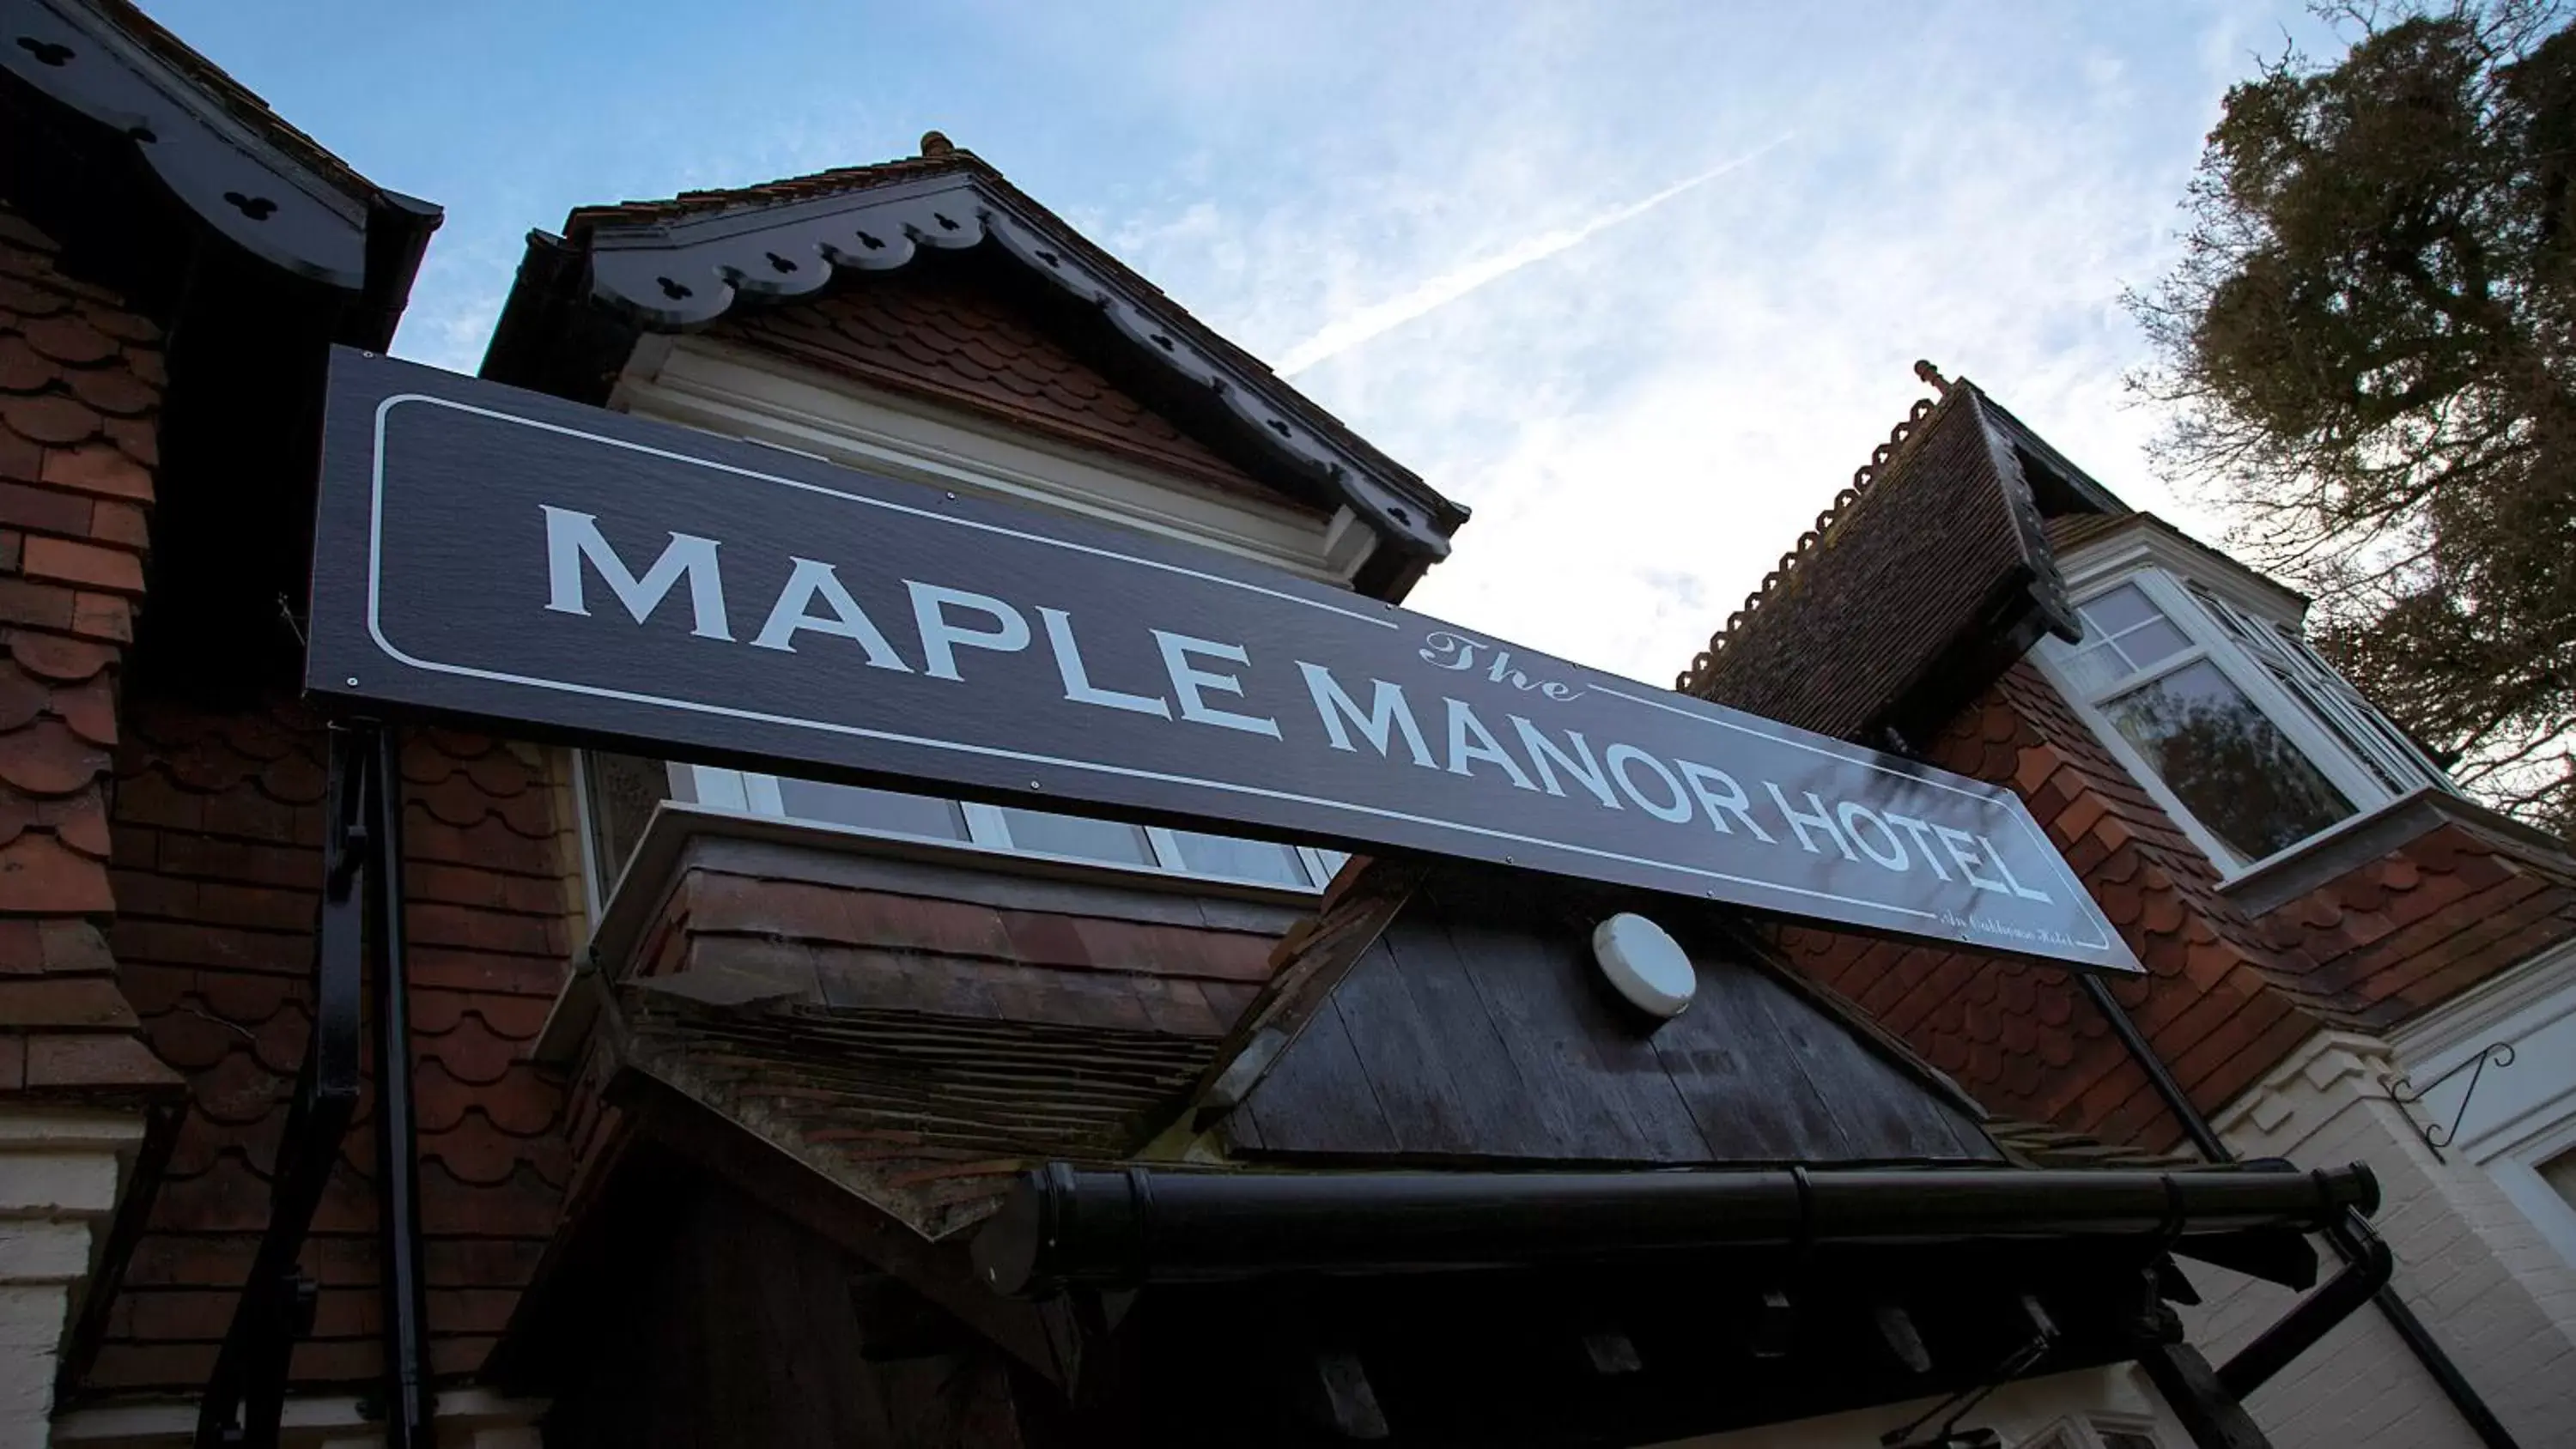 The Maple Manor Hotel and guest holiday parking